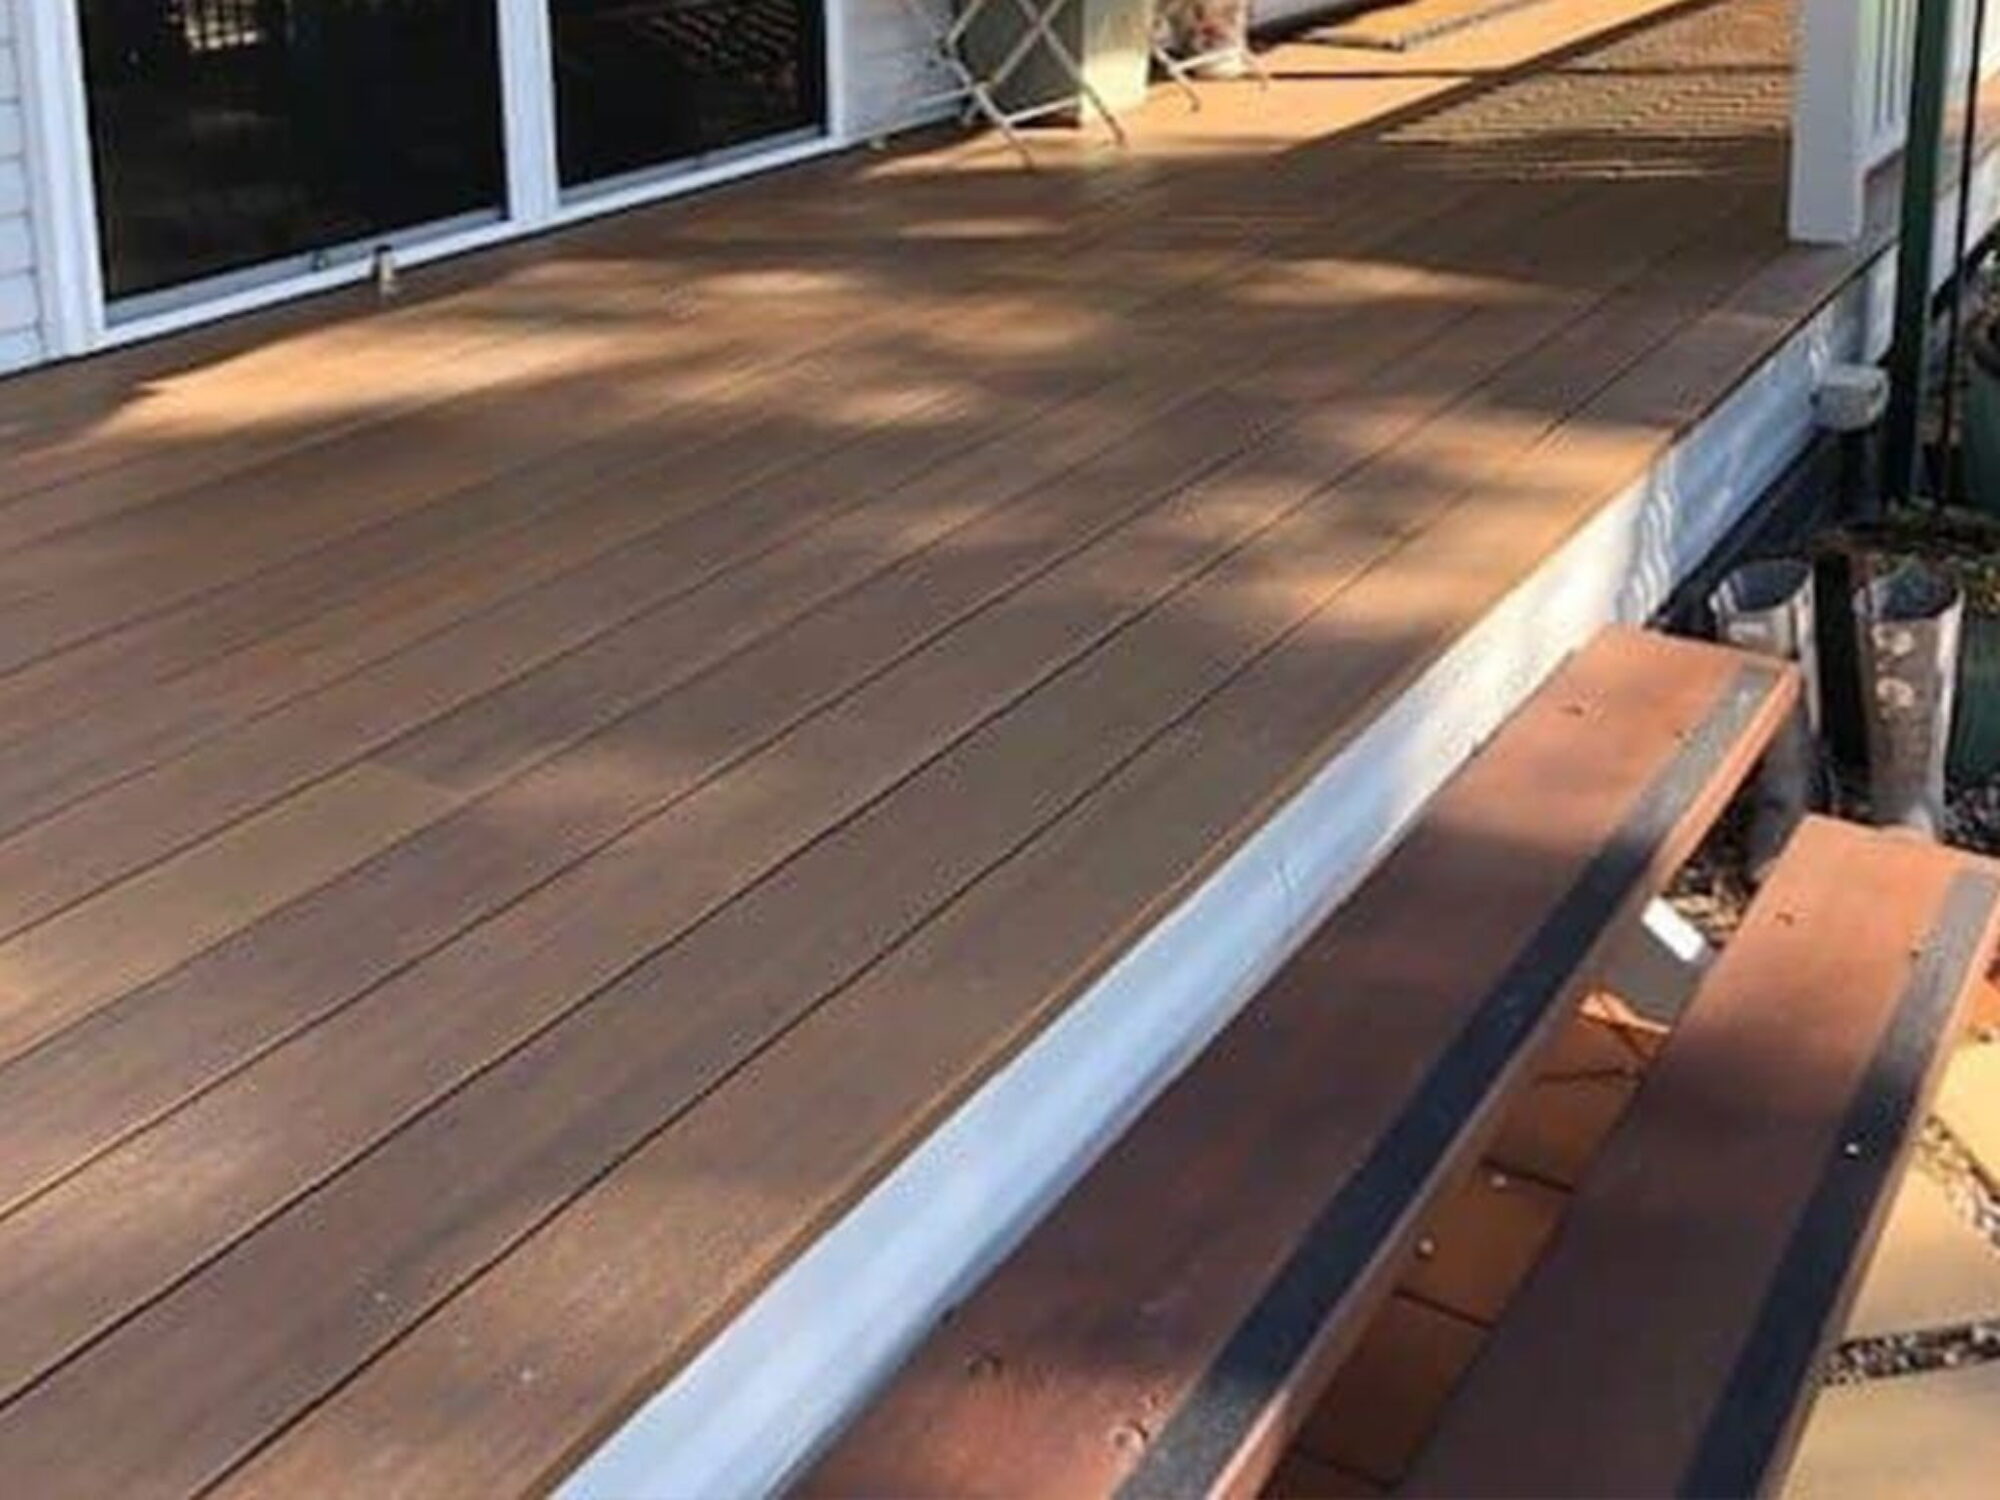 How to Choose the Best Deck Colour